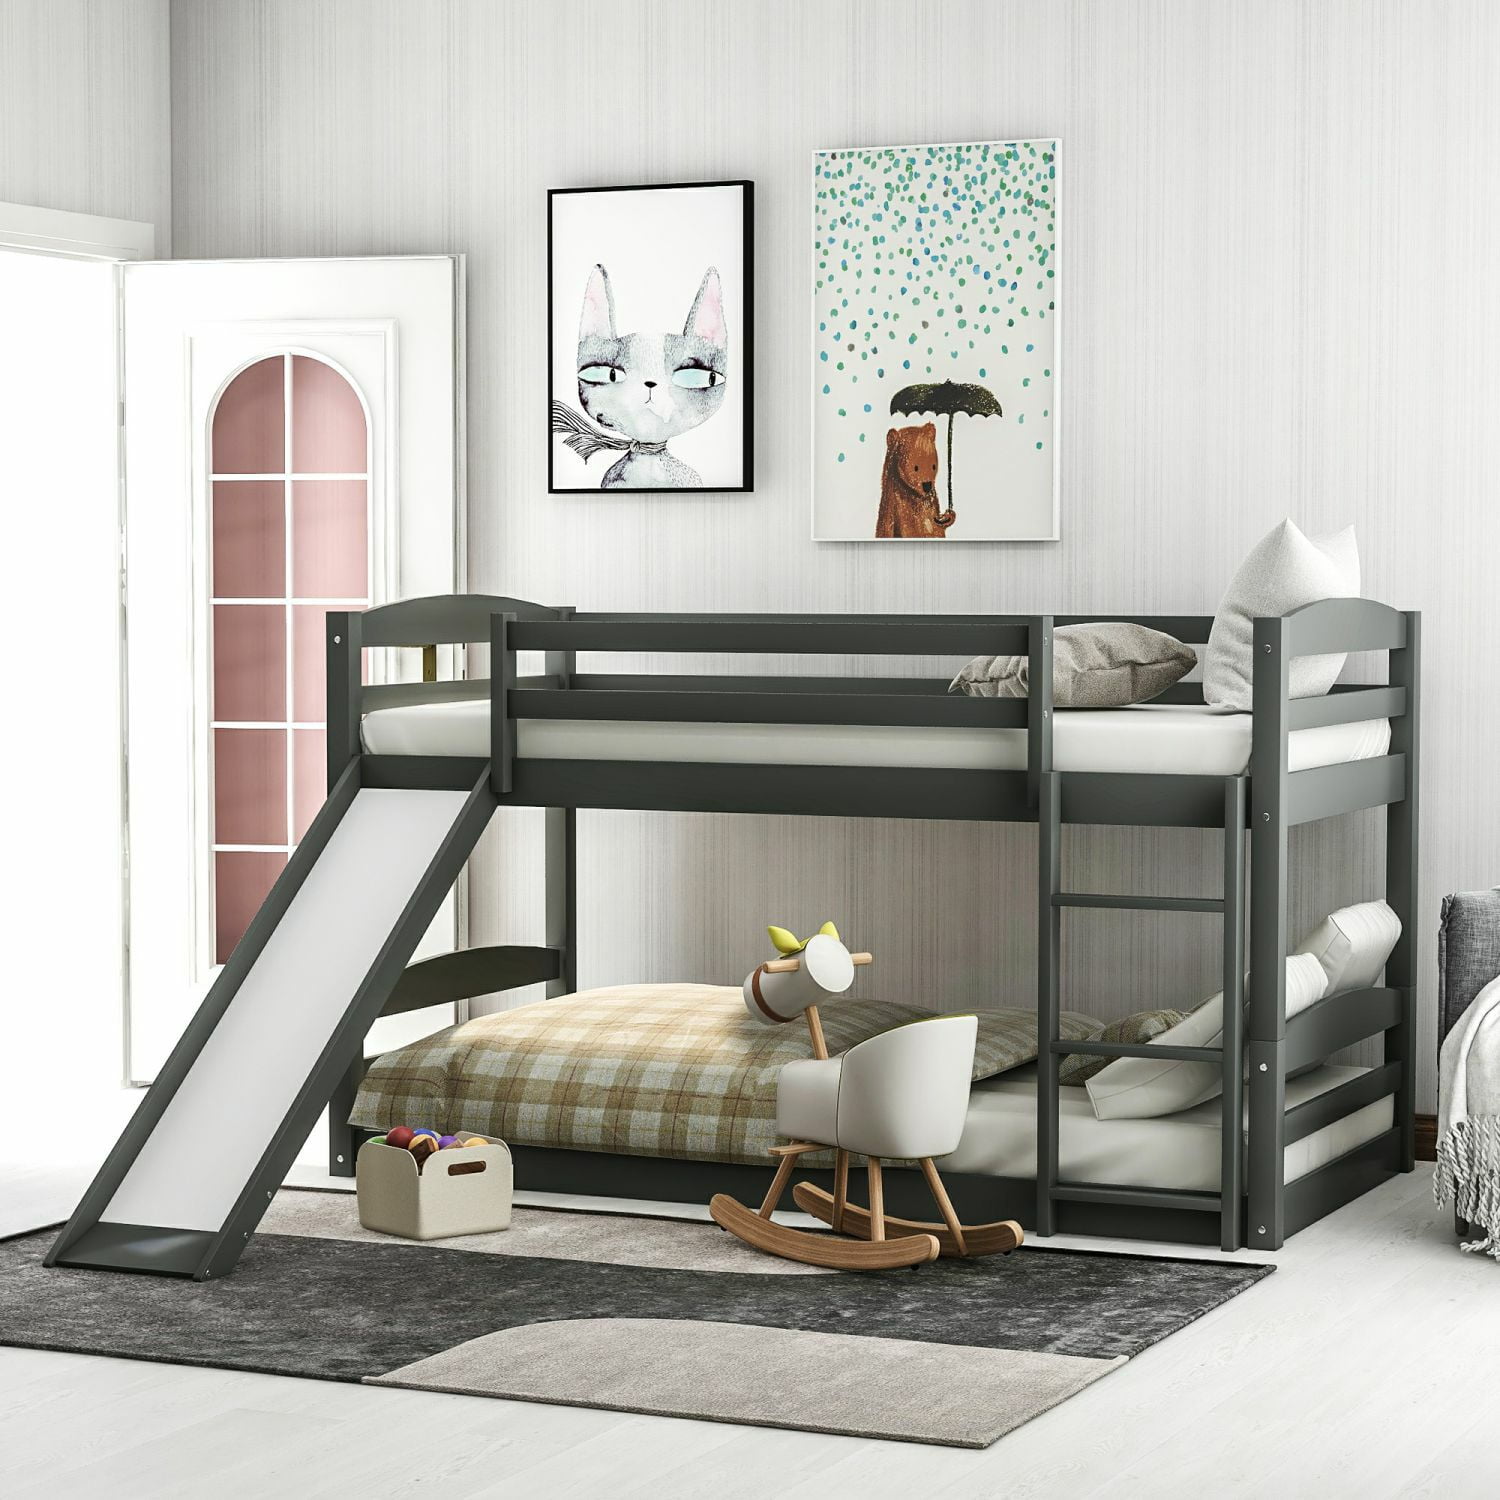 Modern Solid Wood Low Bunk Bed Twin, Can Bunk Beds Be Separated